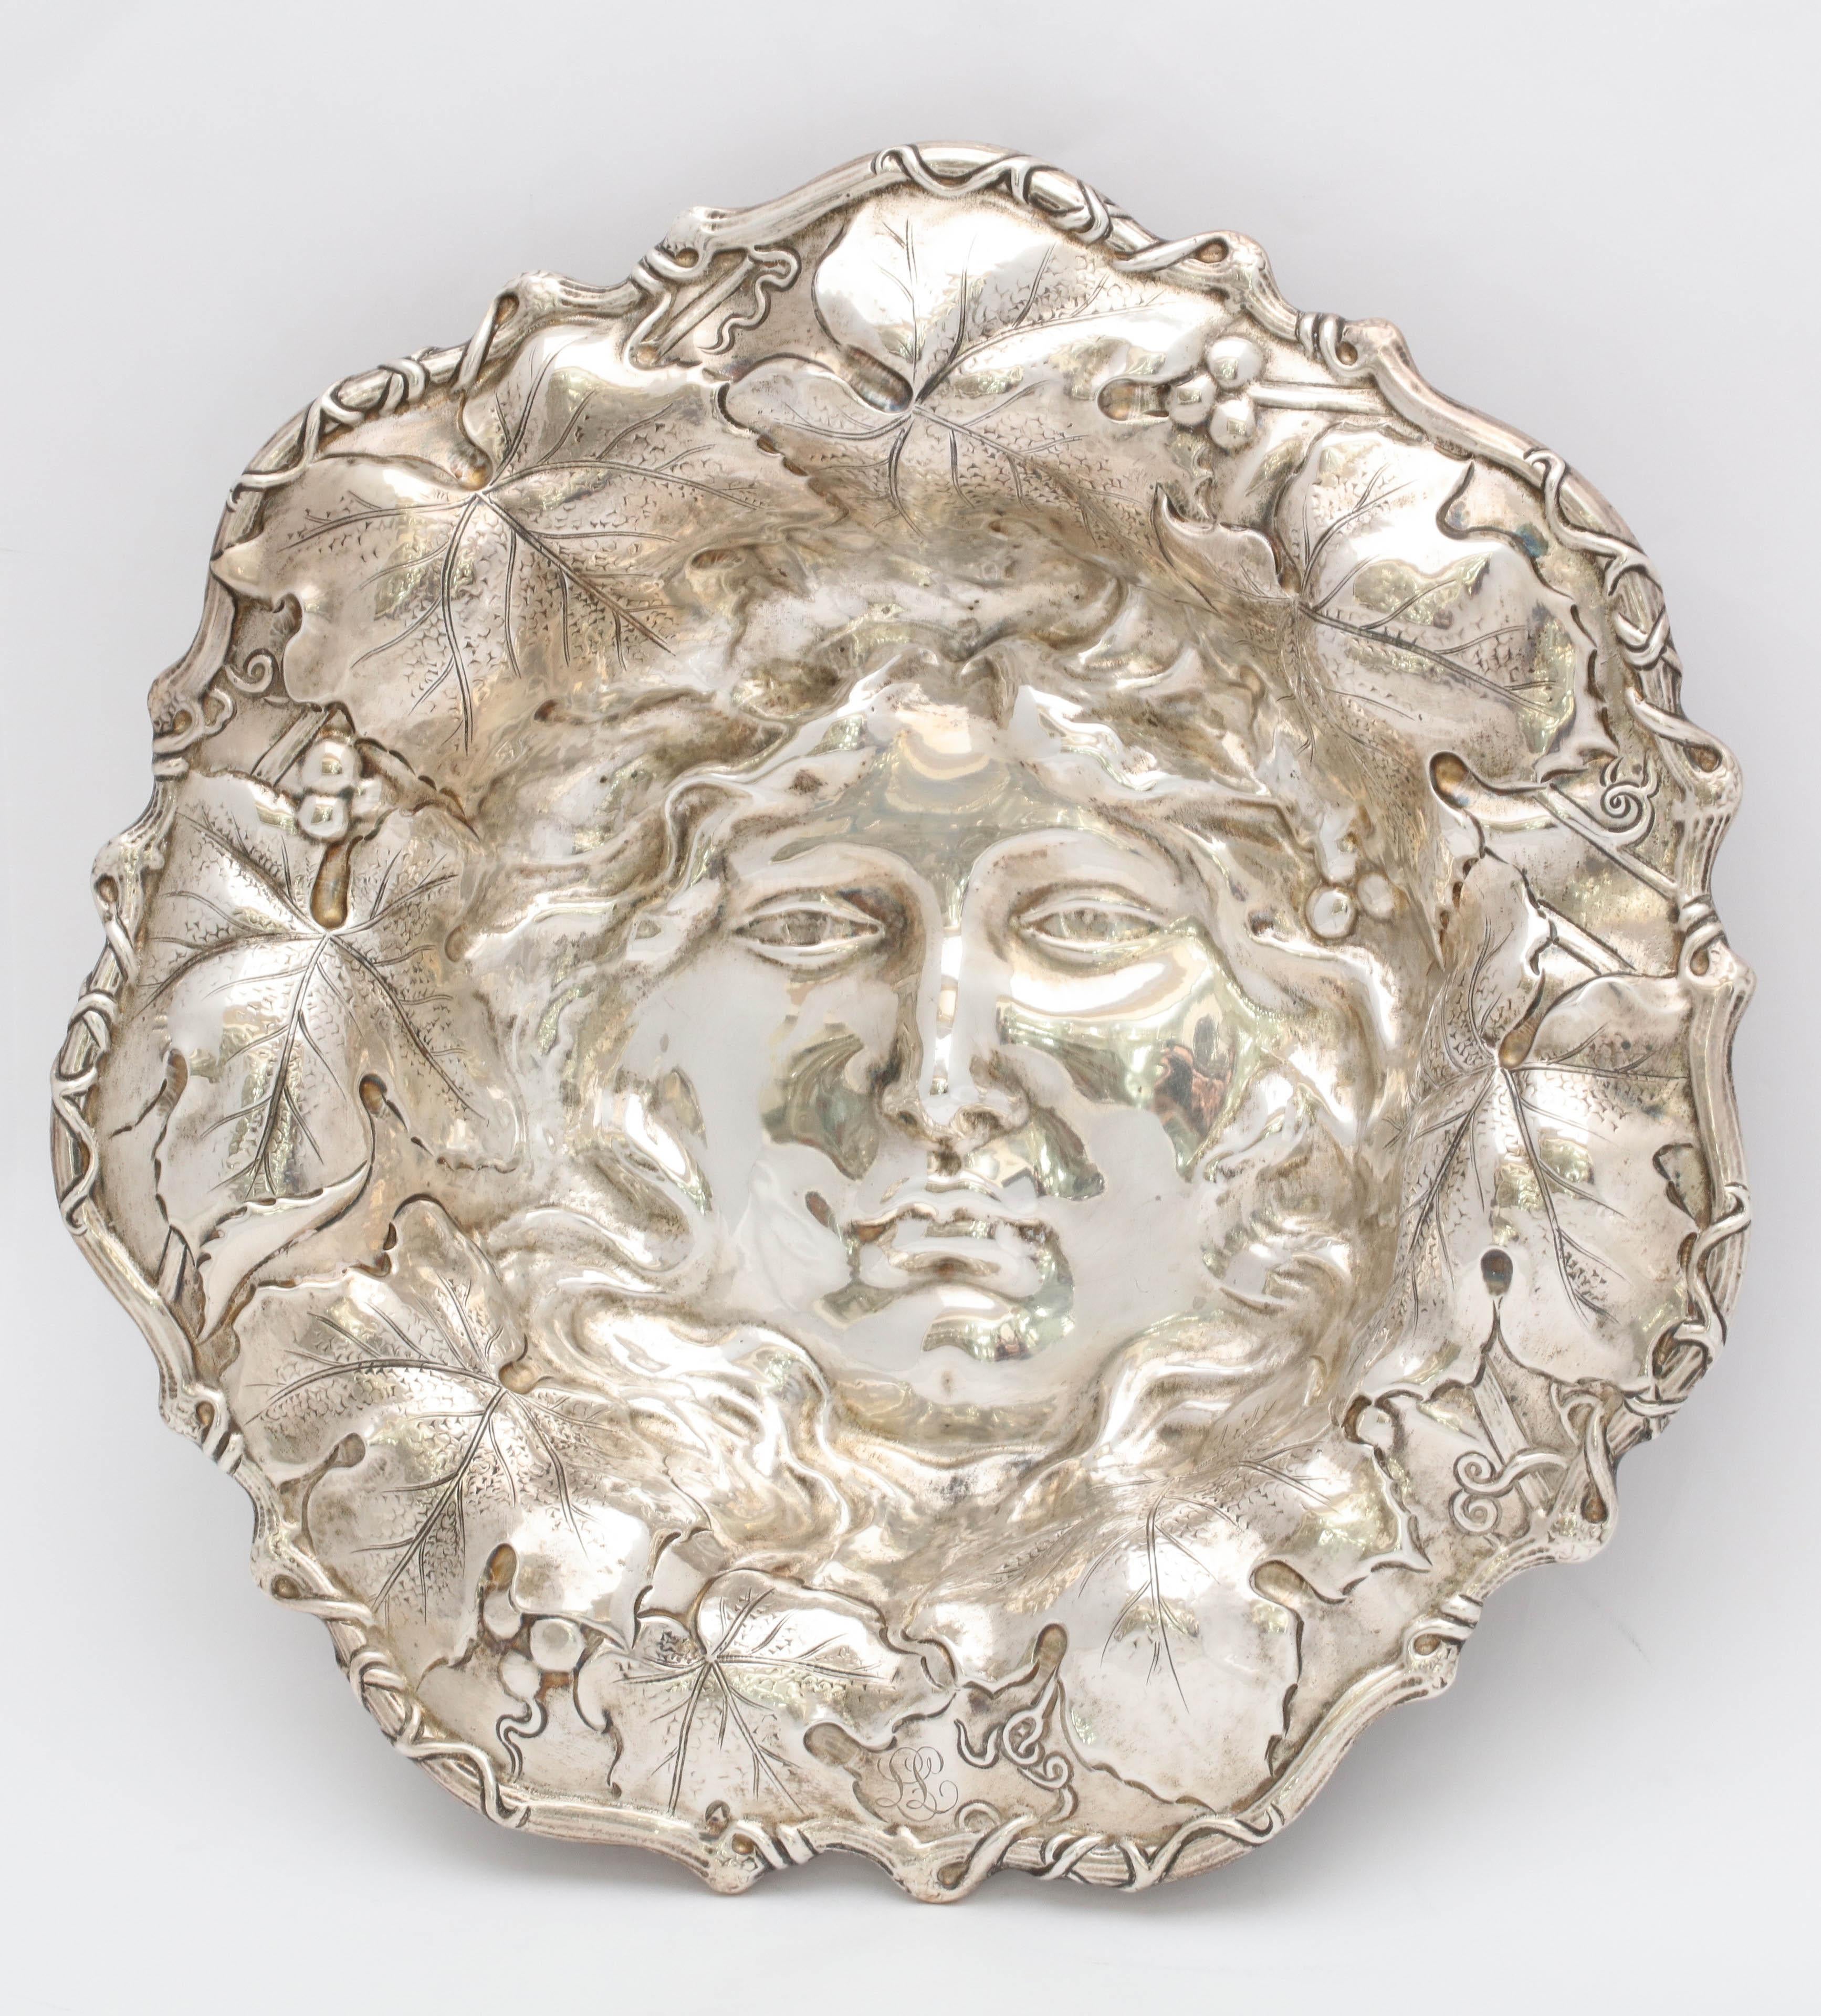 Art Nouveau, sterling silver bowl, in the form of a woman's face (which takes up the centre of the bowl), Whiting Mfg., Co., Providence, Rhode Island, circa 1900. The woman's face is surrounded by her long, flowing hair, grape leaves and vines which